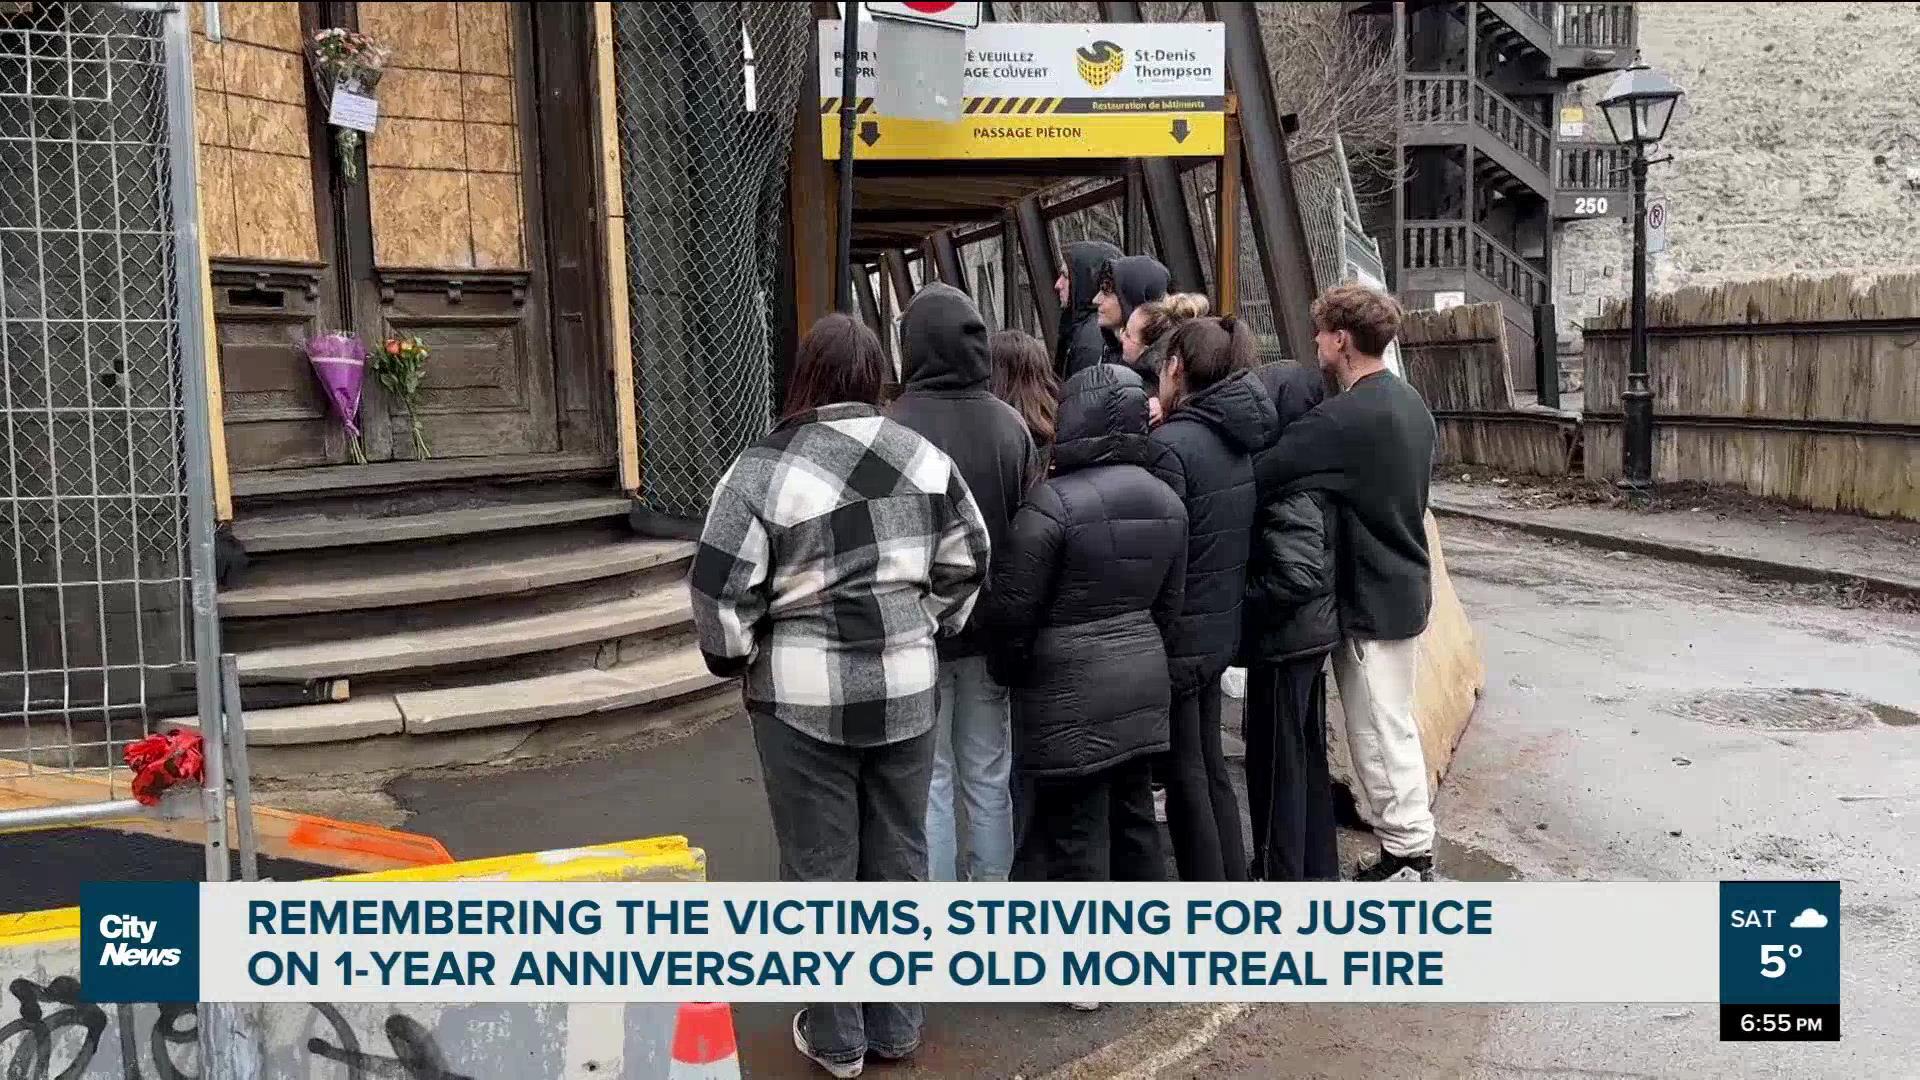 Remembering the victims on one-year anniversary of Old Montreal Fire